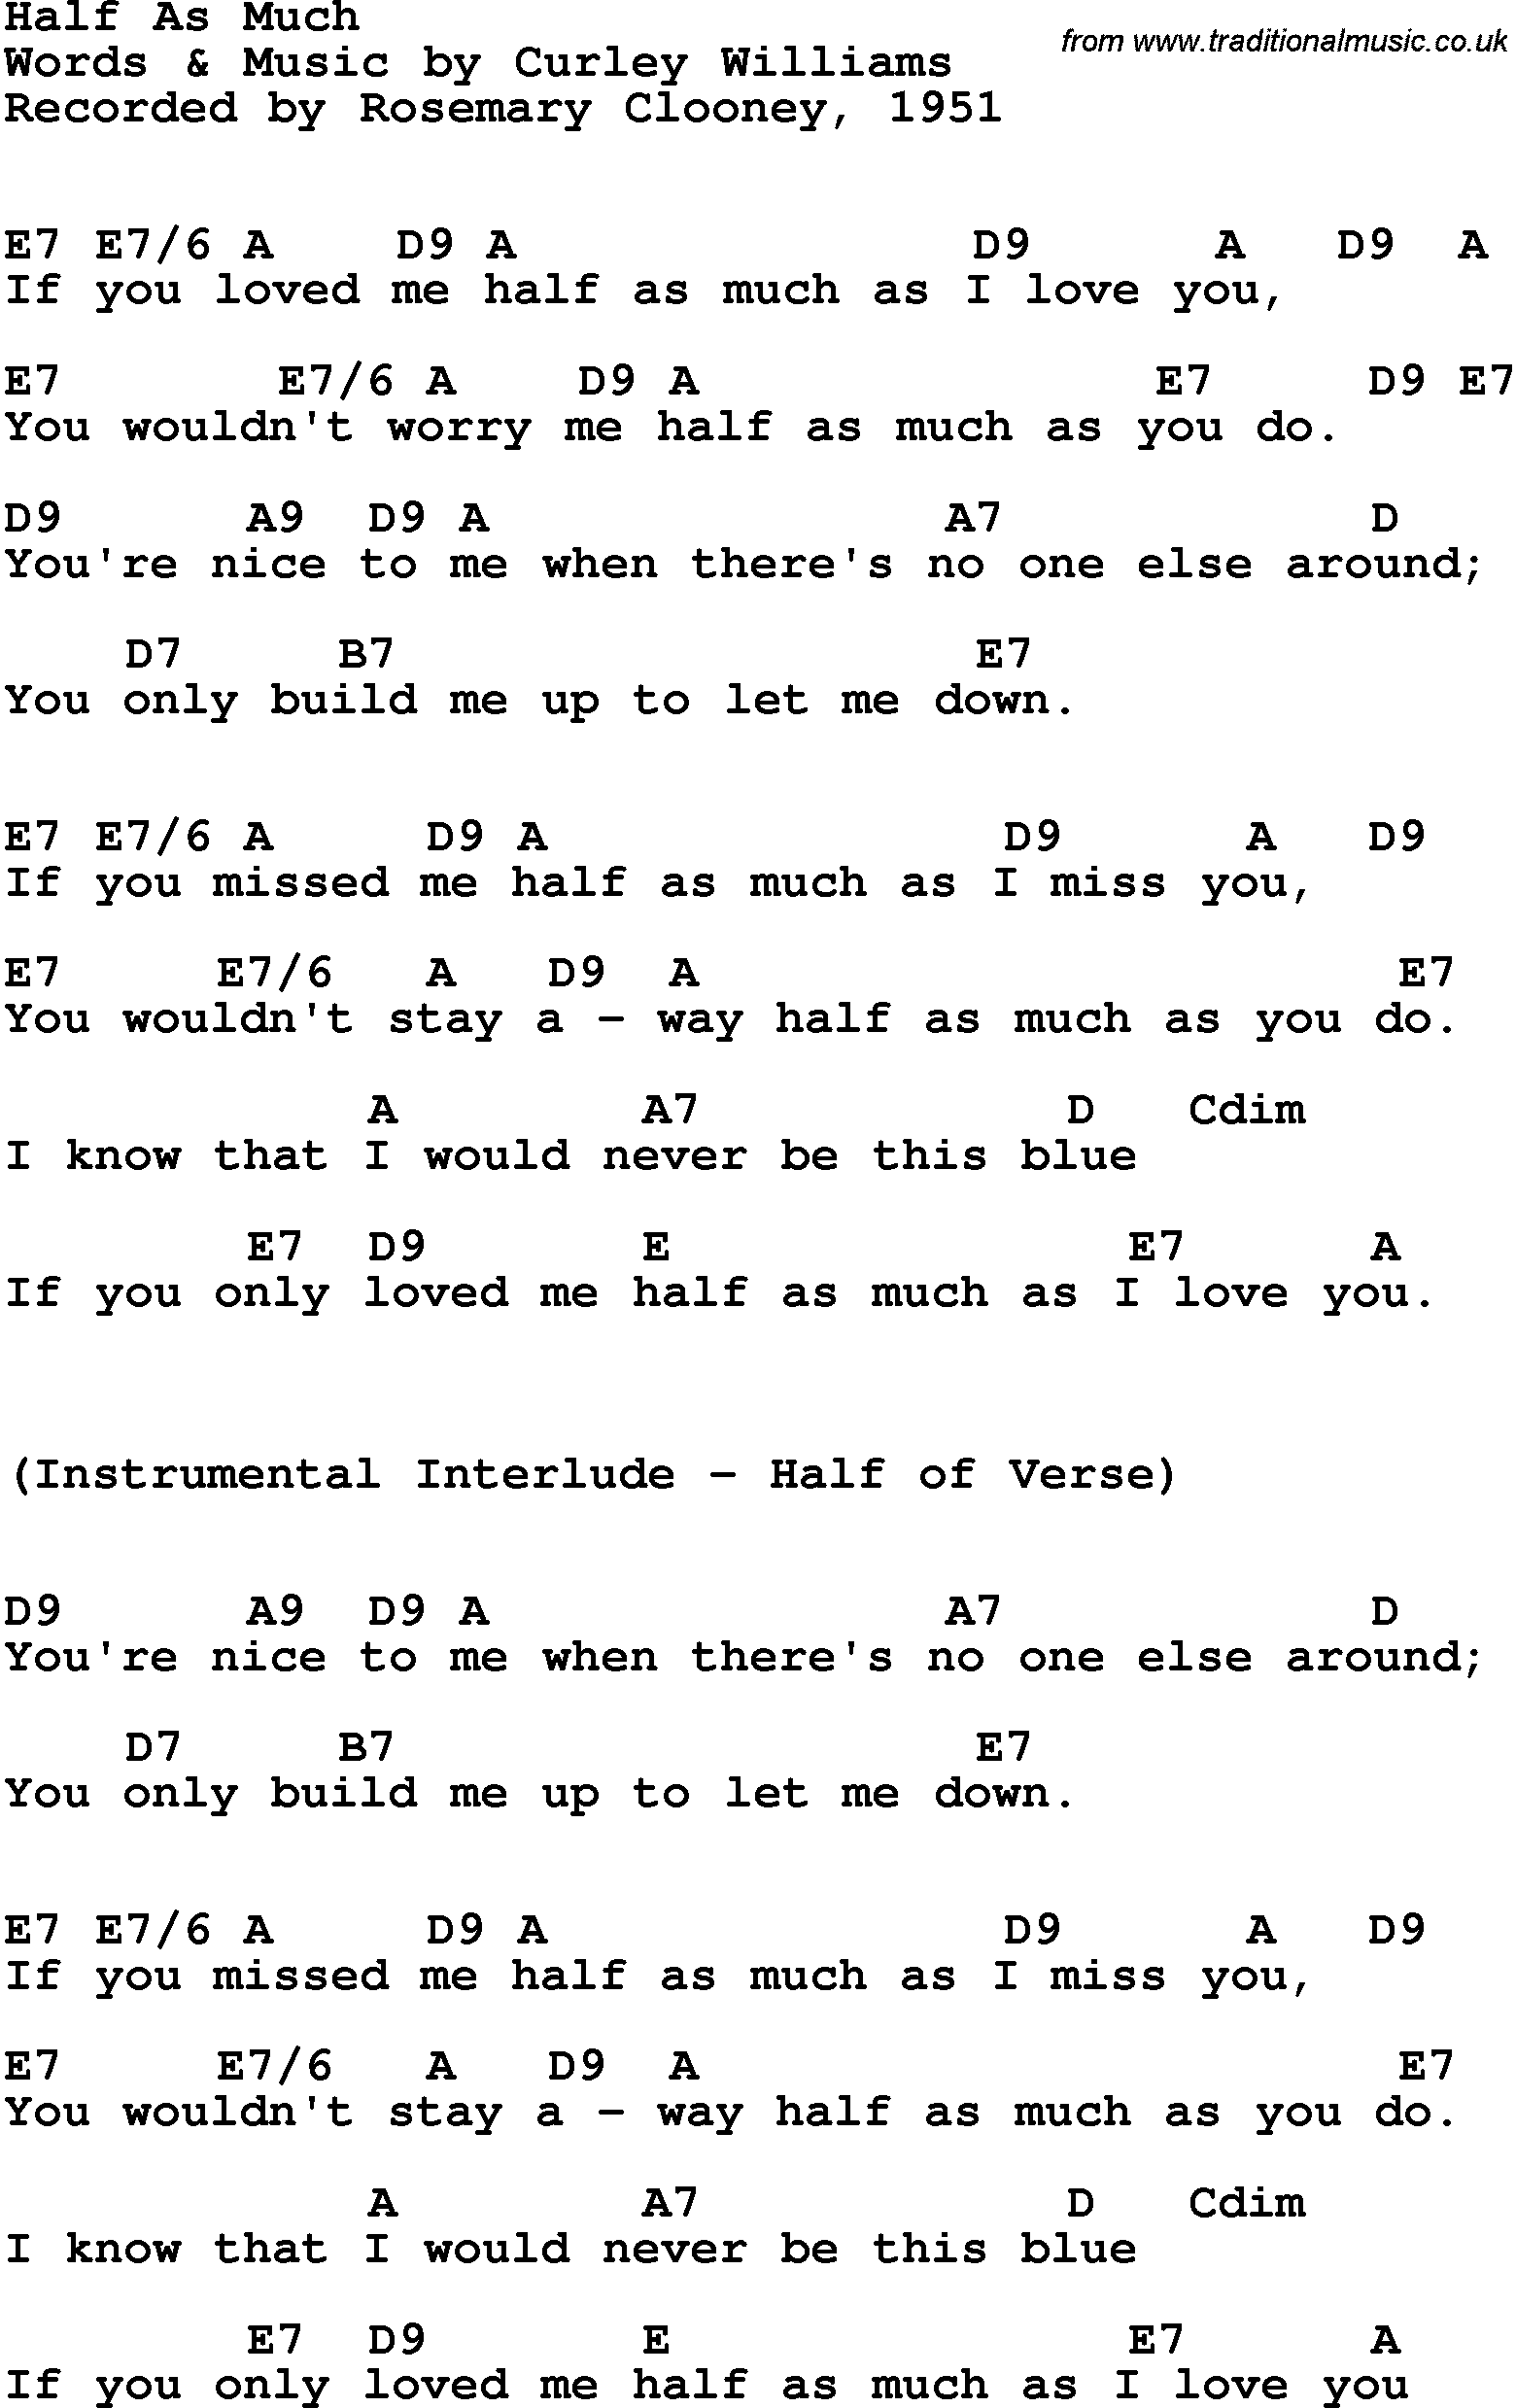 Song Lyrics with guitar chords for Half As Much - Rosemary Clooney, 1951